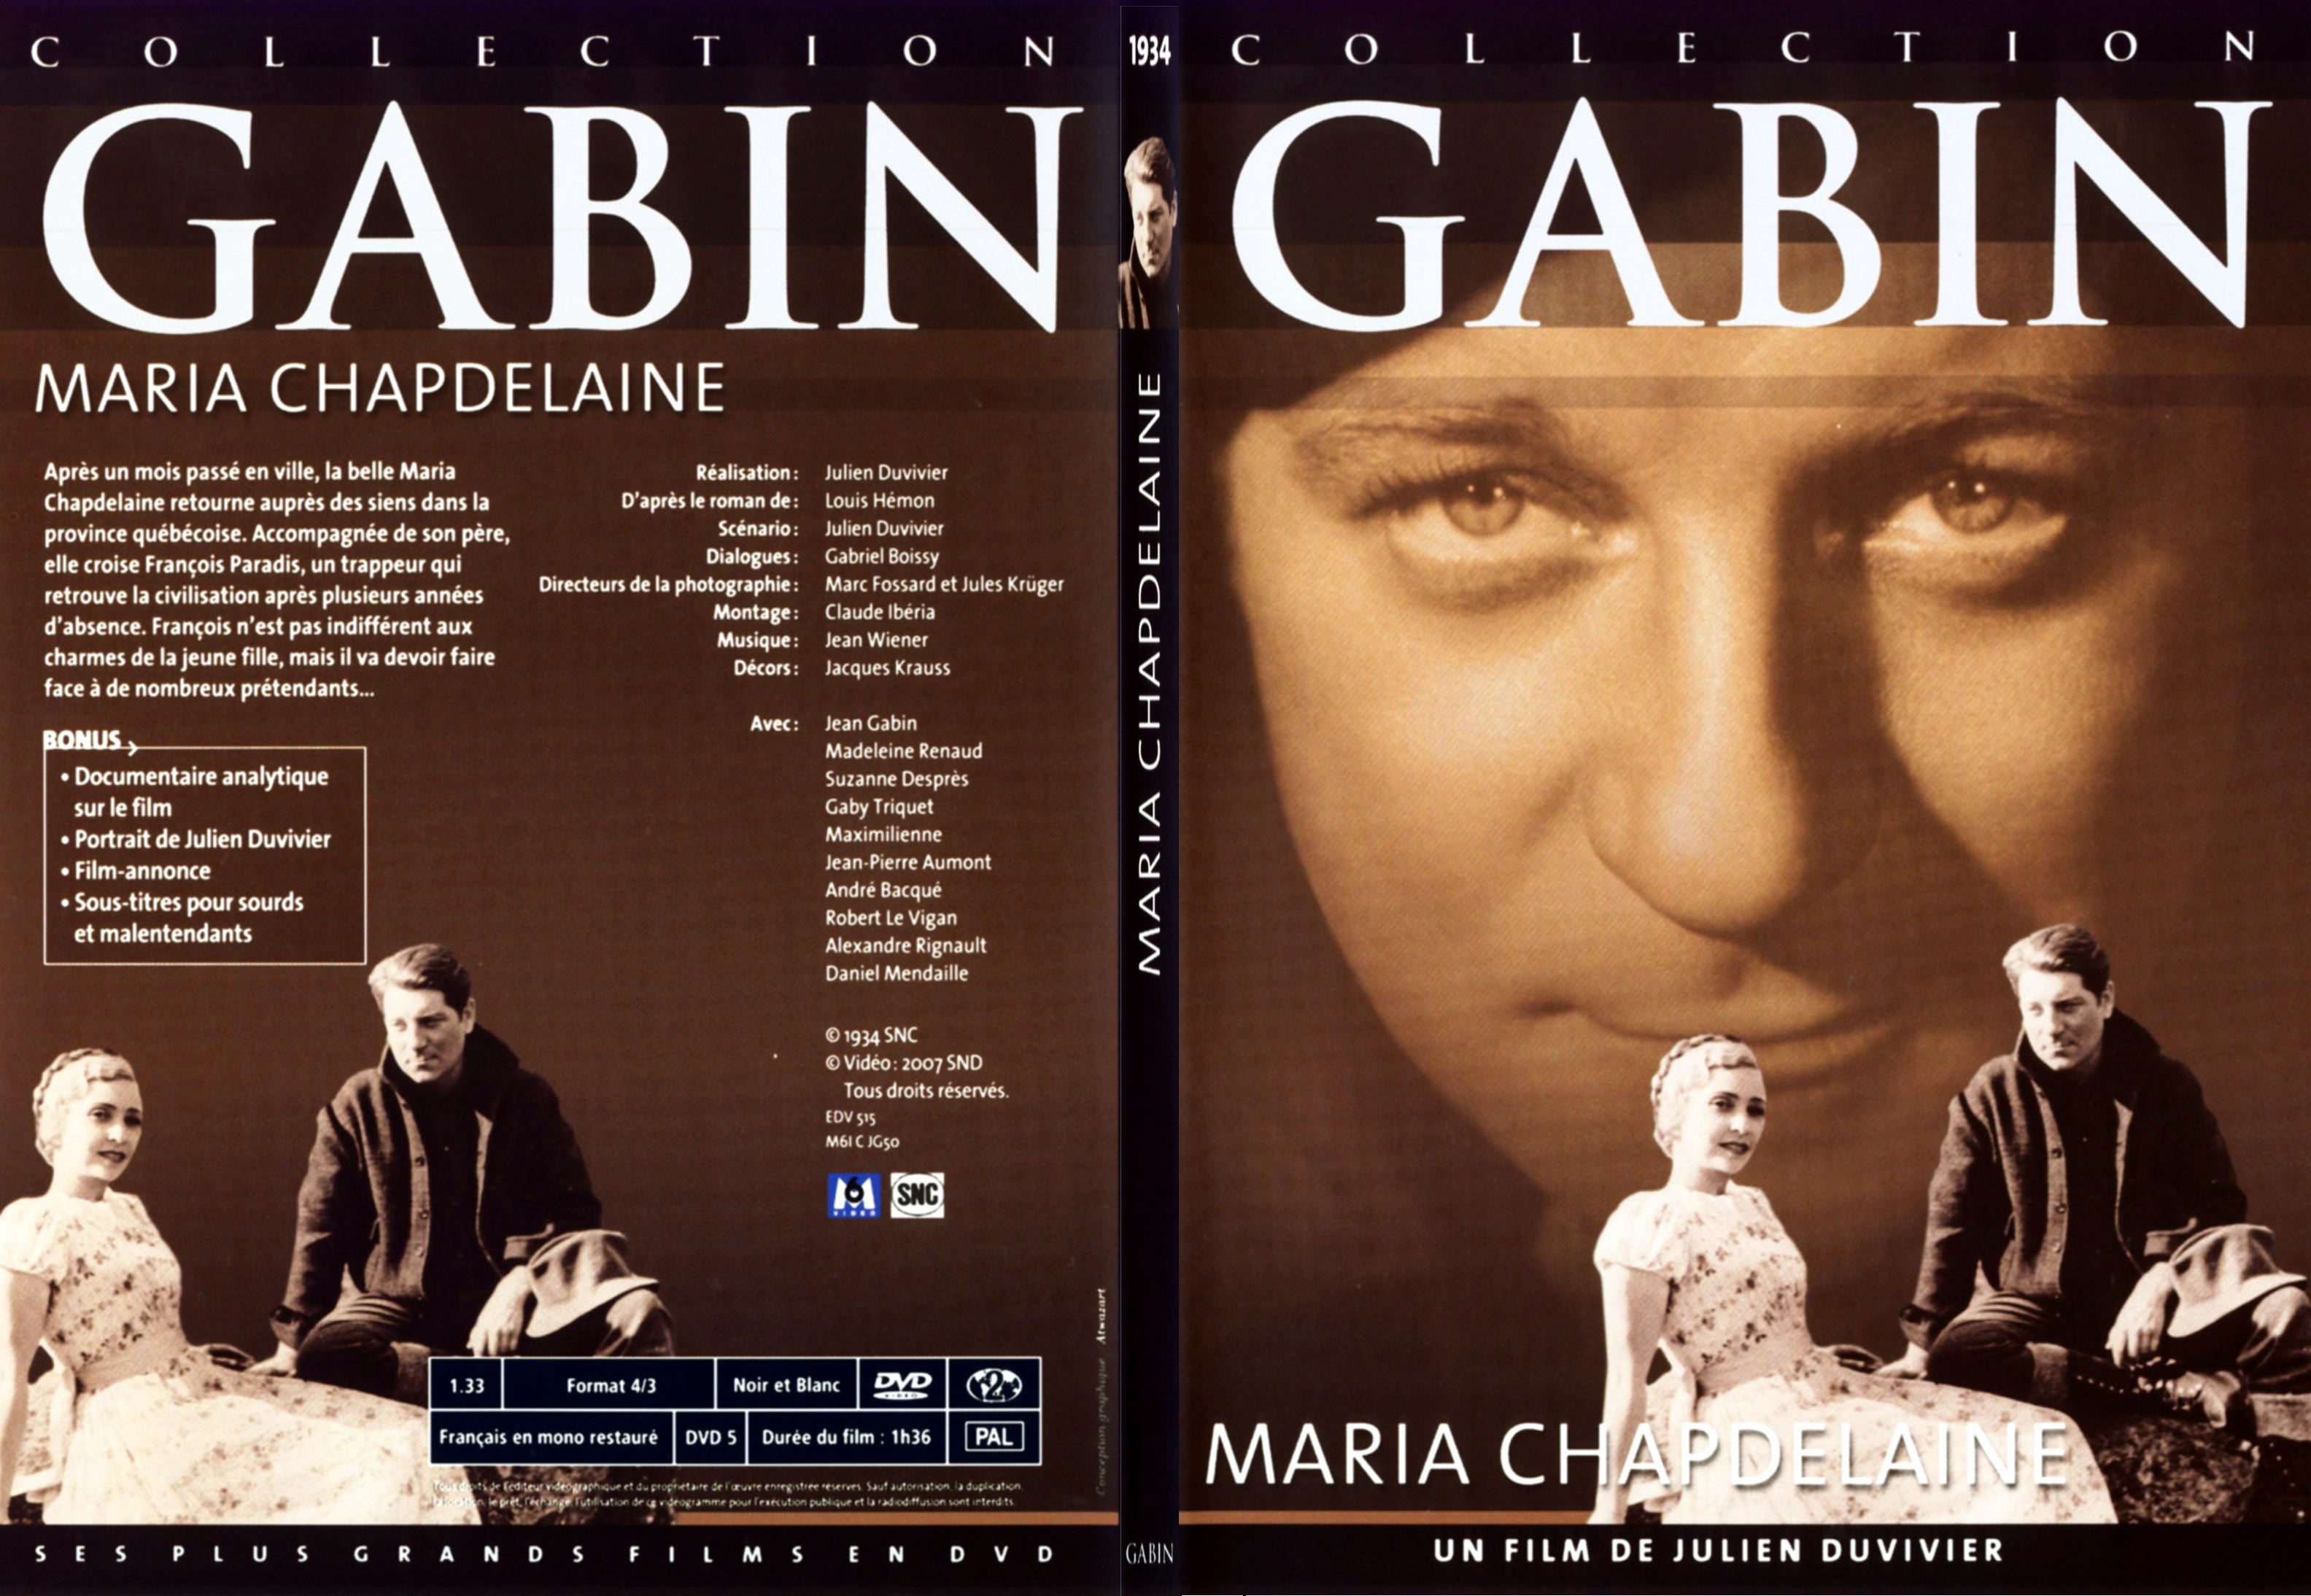 Jaquette DVD Maria Chapdelaine - SLIM